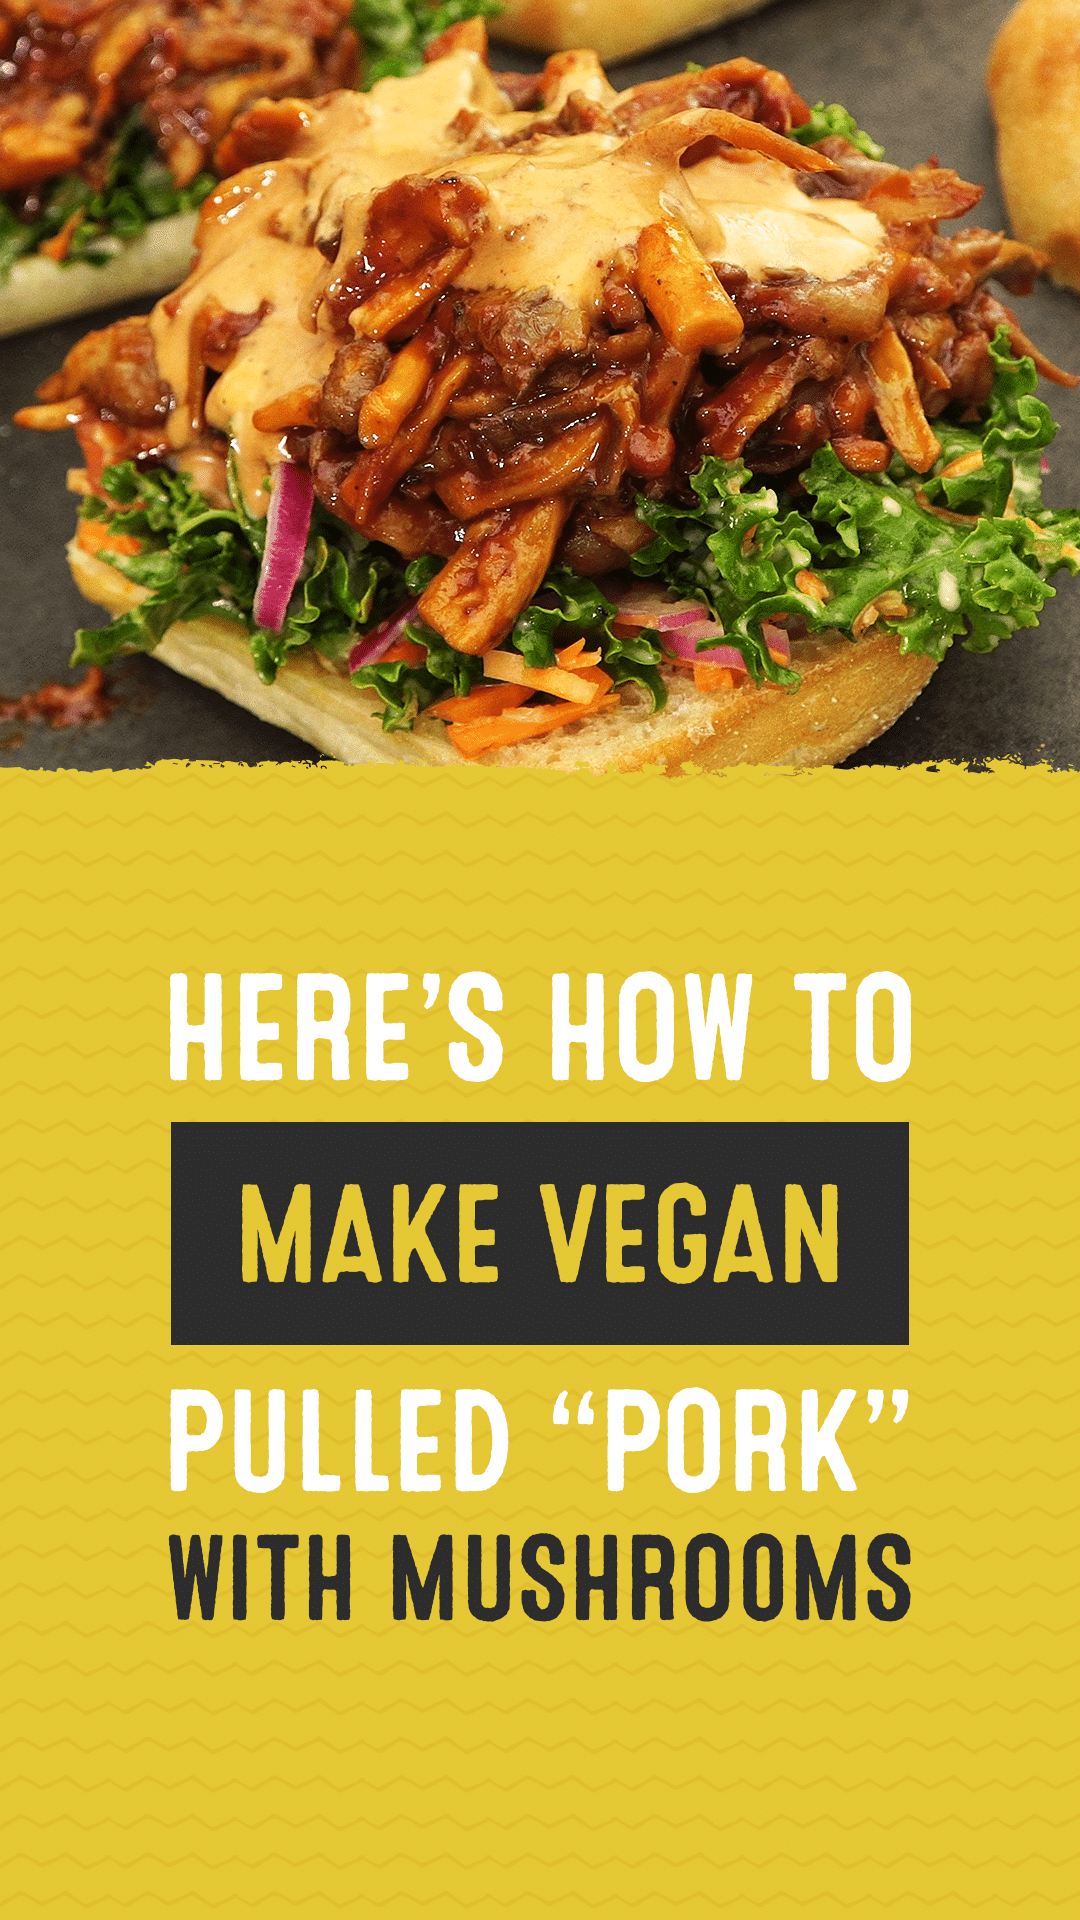 Here’s How to Make Vegan Pulled “Pork” With Mushrooms